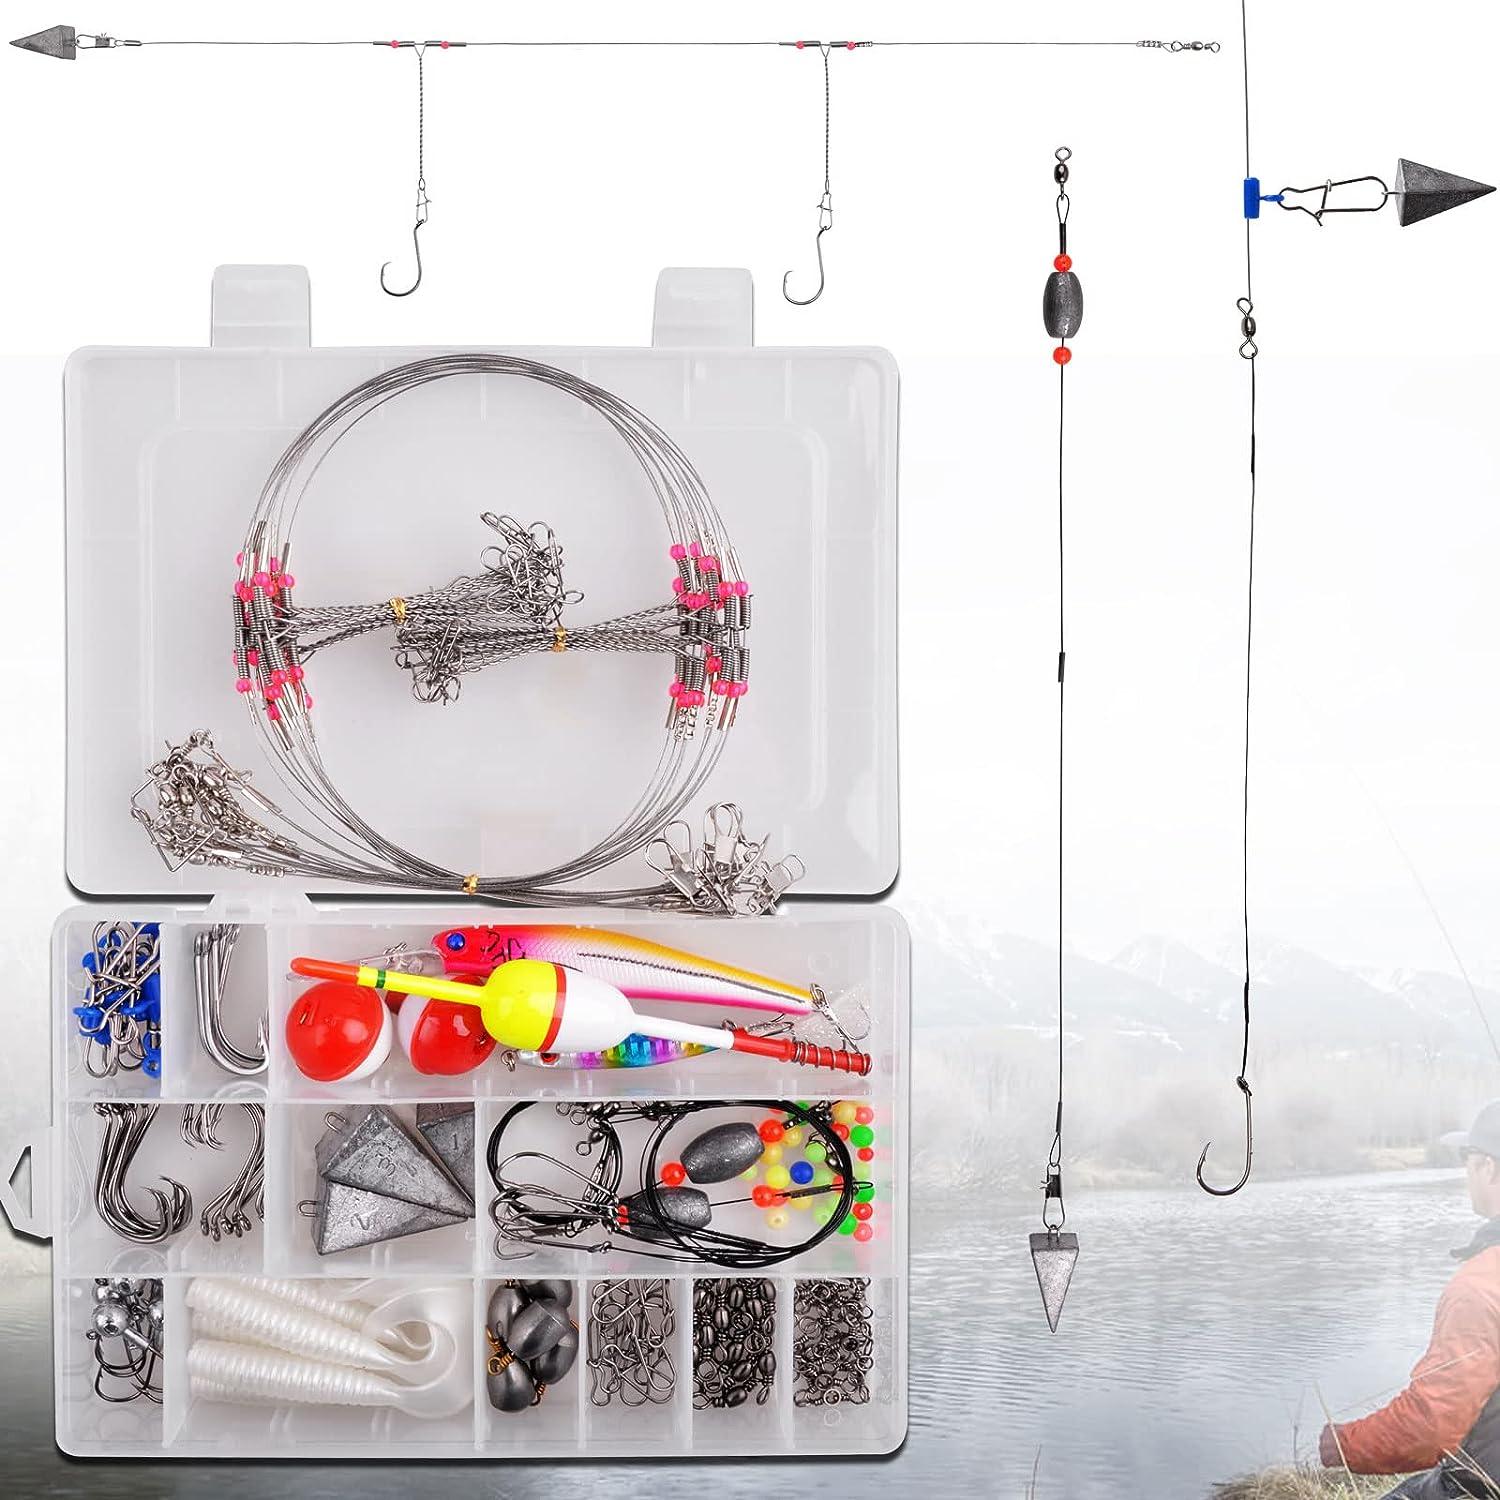 Saltwater Fishing Surf Fishing Rigs Tackle Kit - 138pcs Include Pyramid  Sinkers Saltwater Fishing Lures Hooks Leaders Swivels Snaps Beads Floats  Beach Fishing Gear